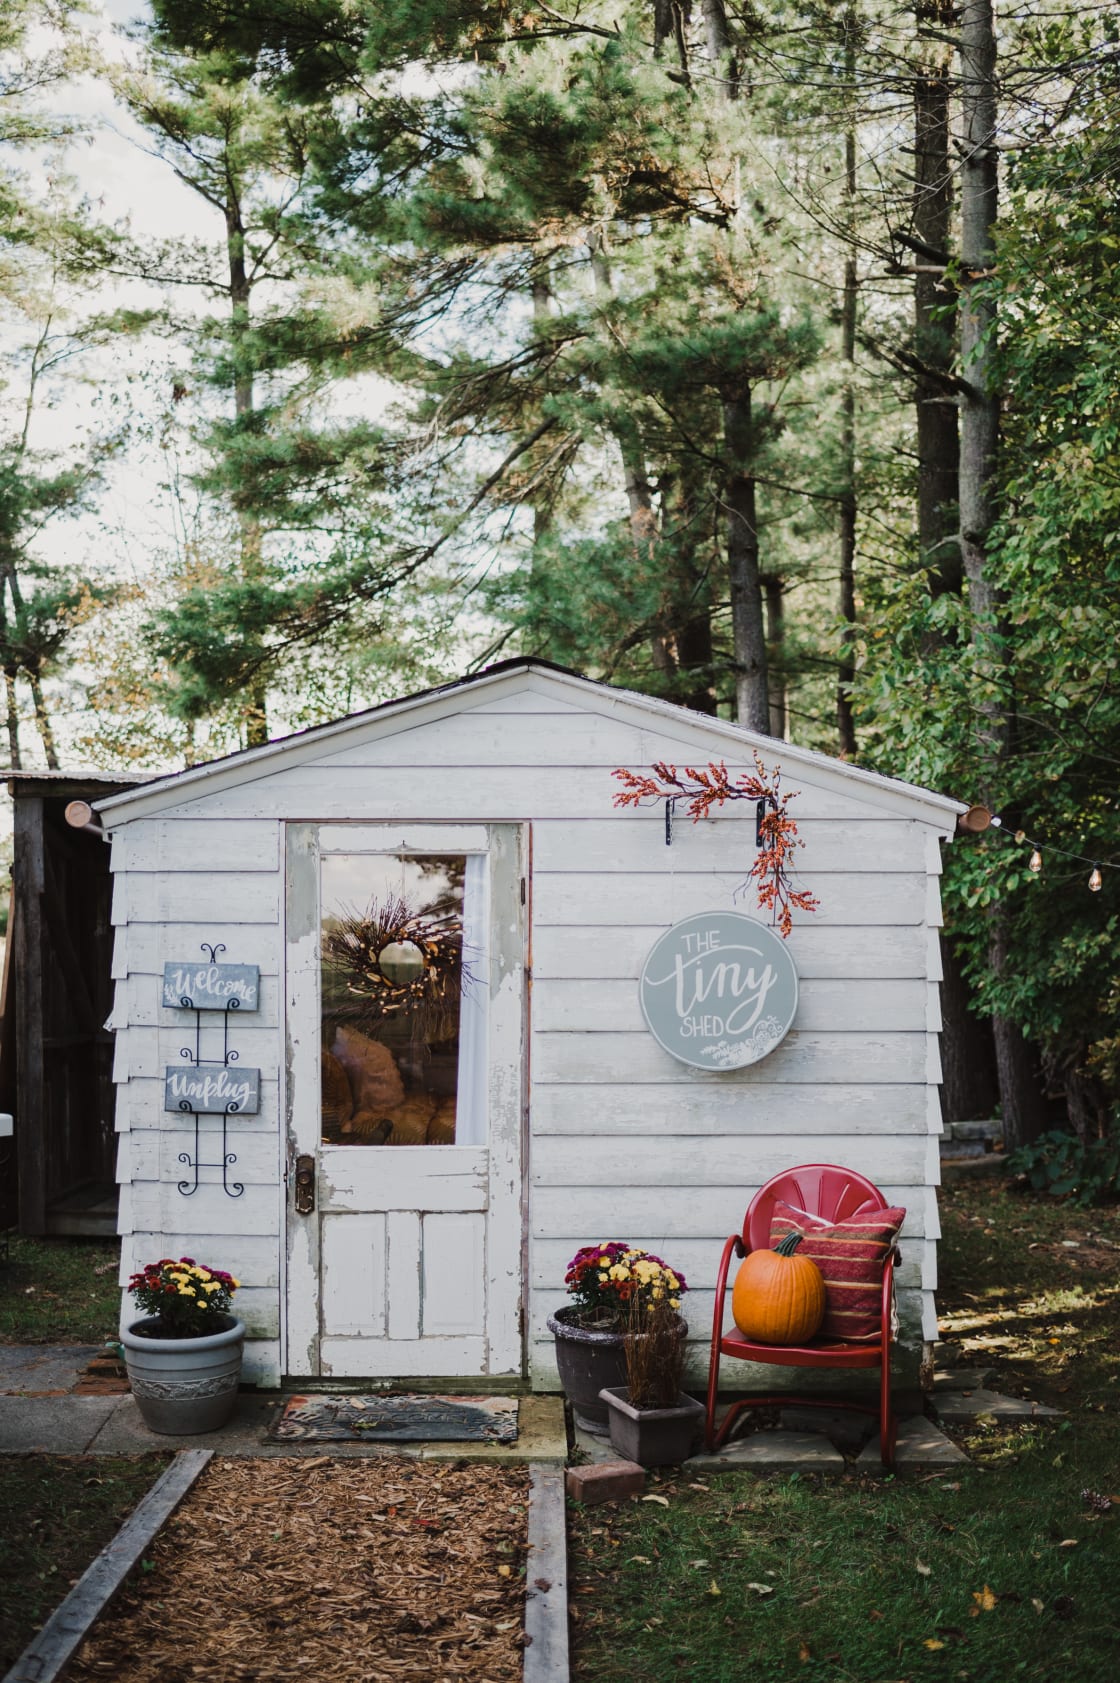 It doesn't get cuter or cozier than The Tiny Shed.